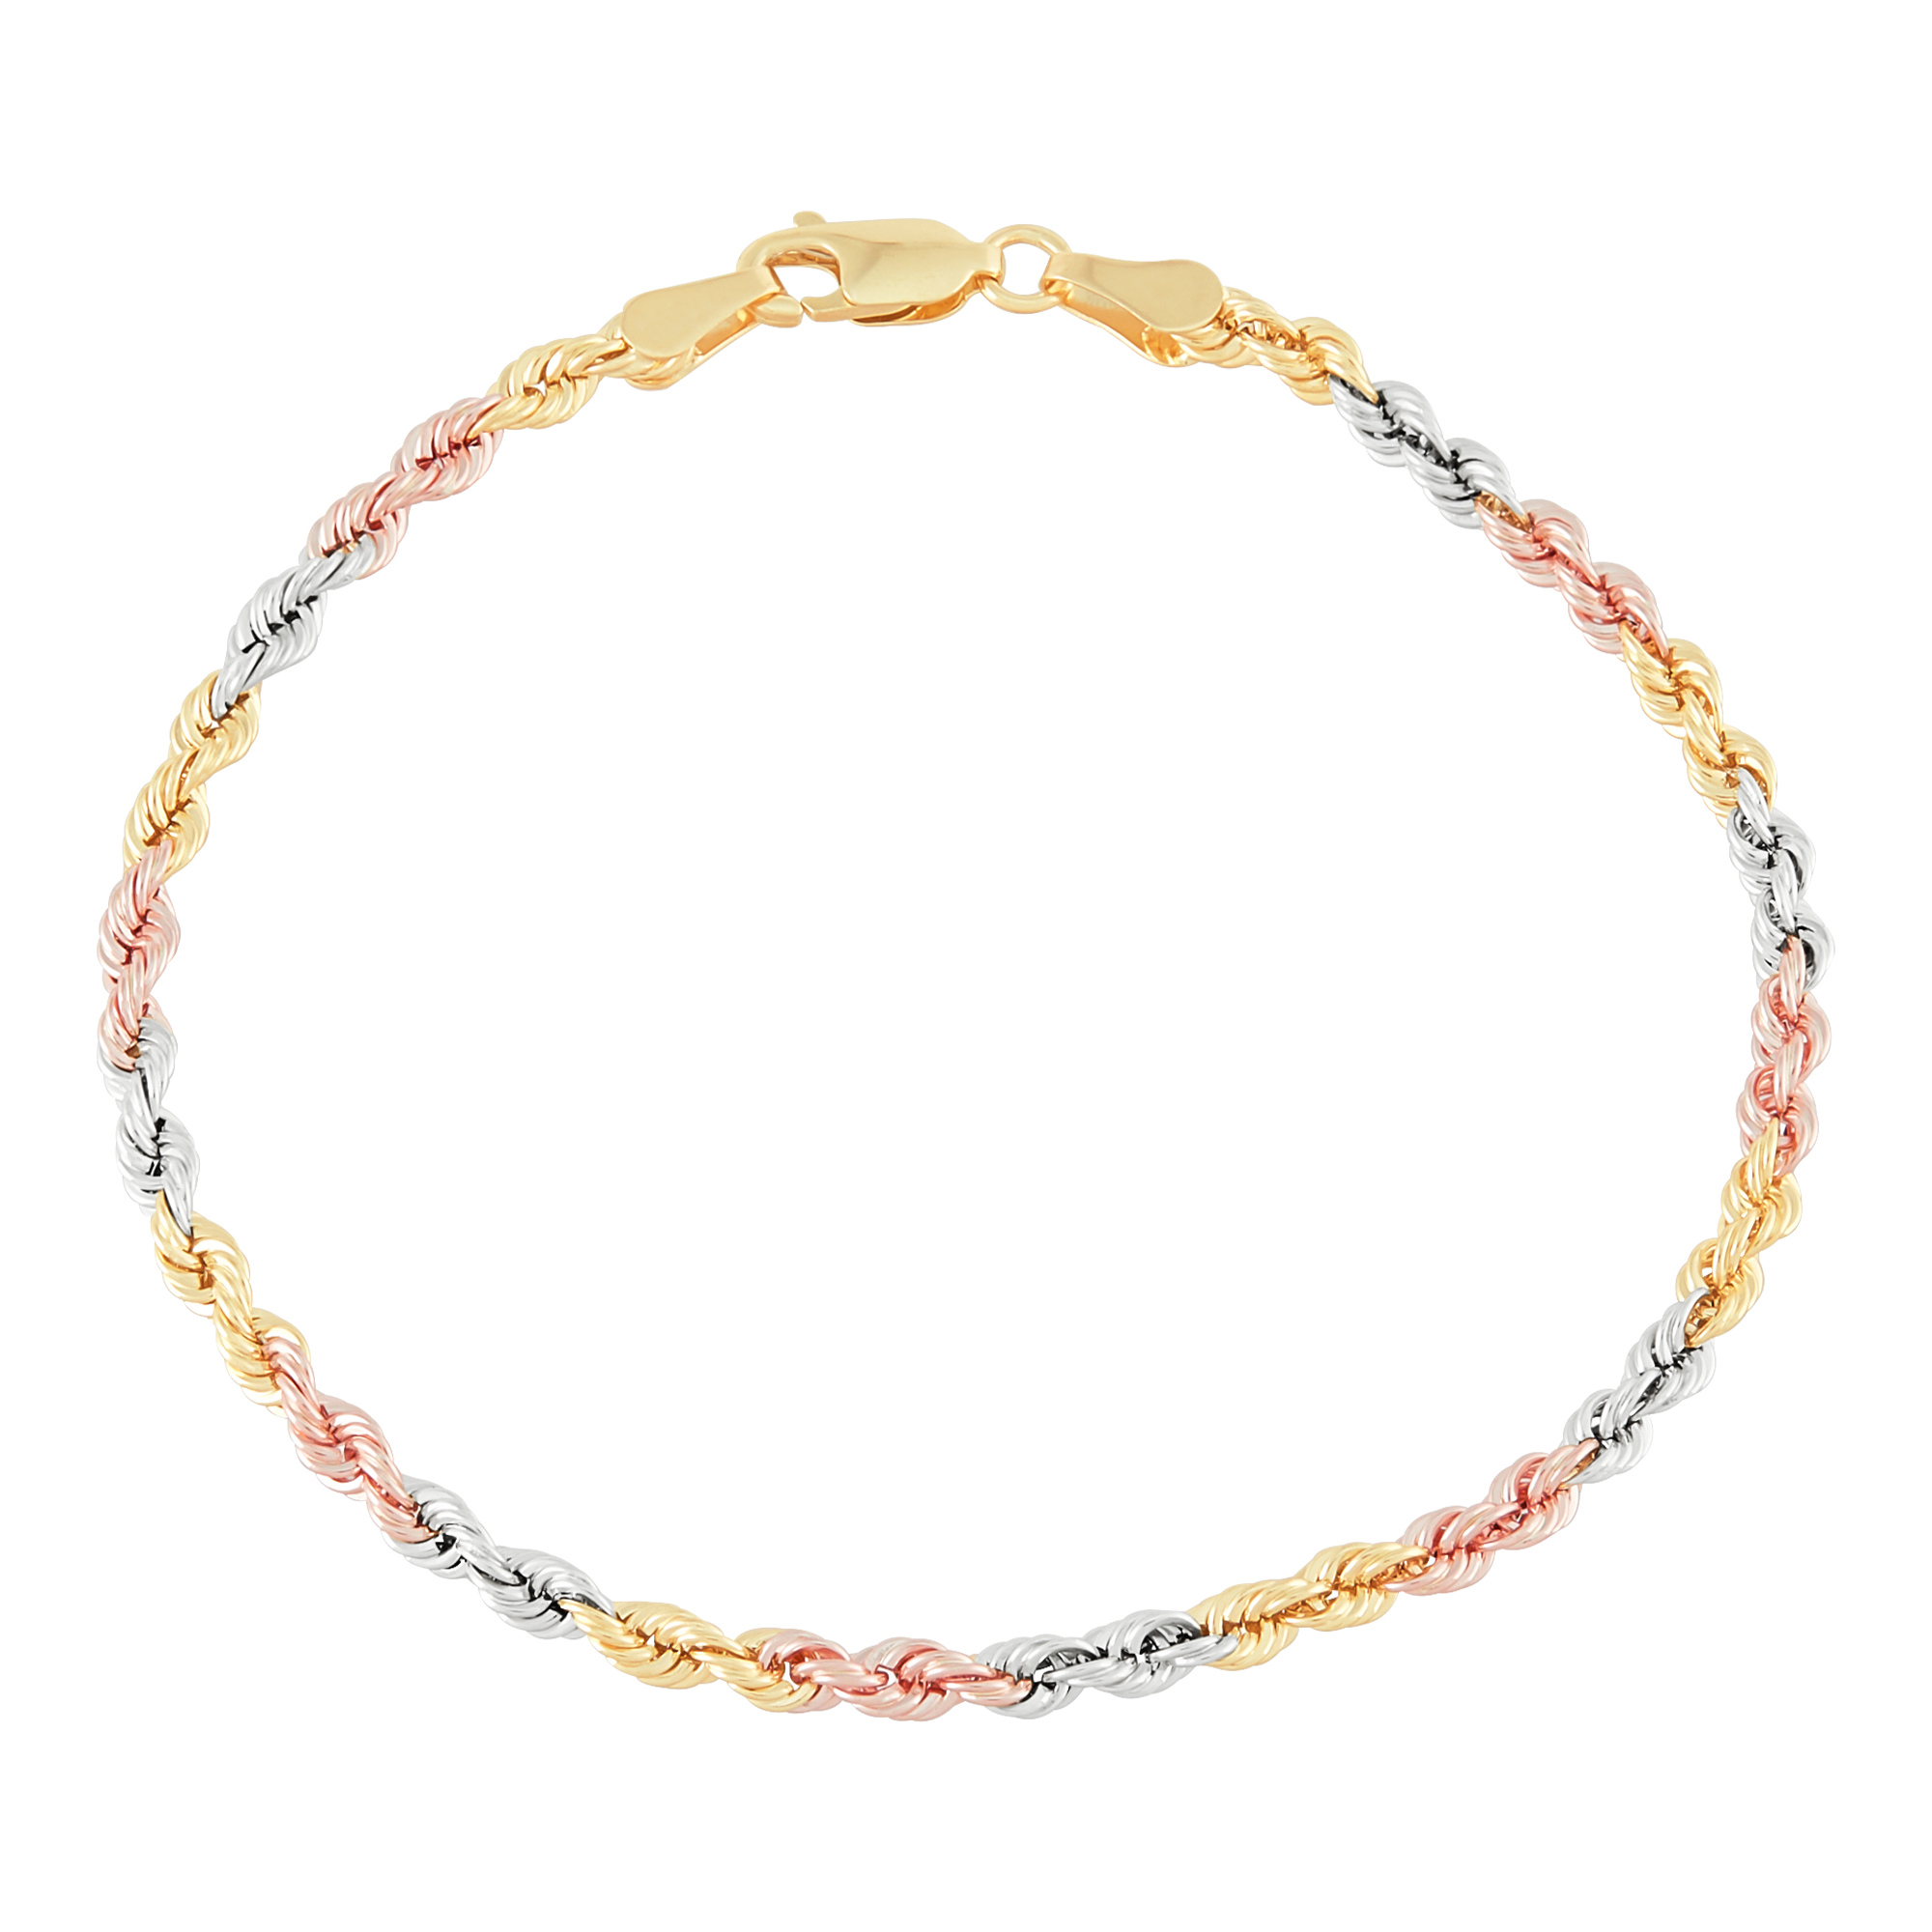 Tricolor Twisted Rope Bracelet in 10K Yellow, White & Rose Gold